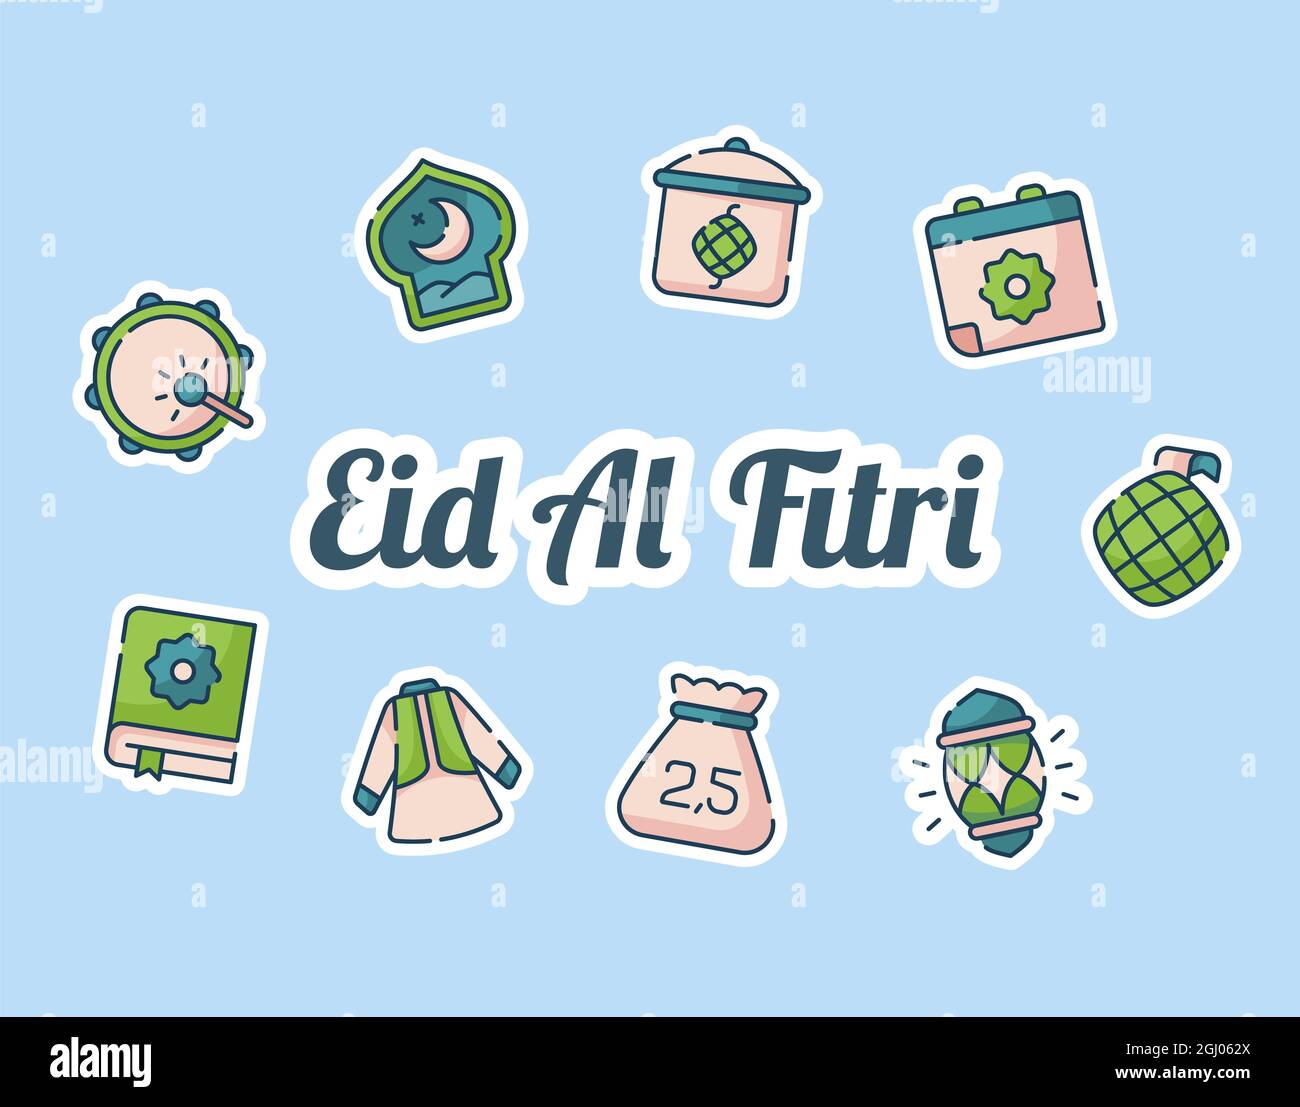 eid al fitri lettering around set icons package blue isolated background with modern flat cartoon style vector design illustration Stock Photo